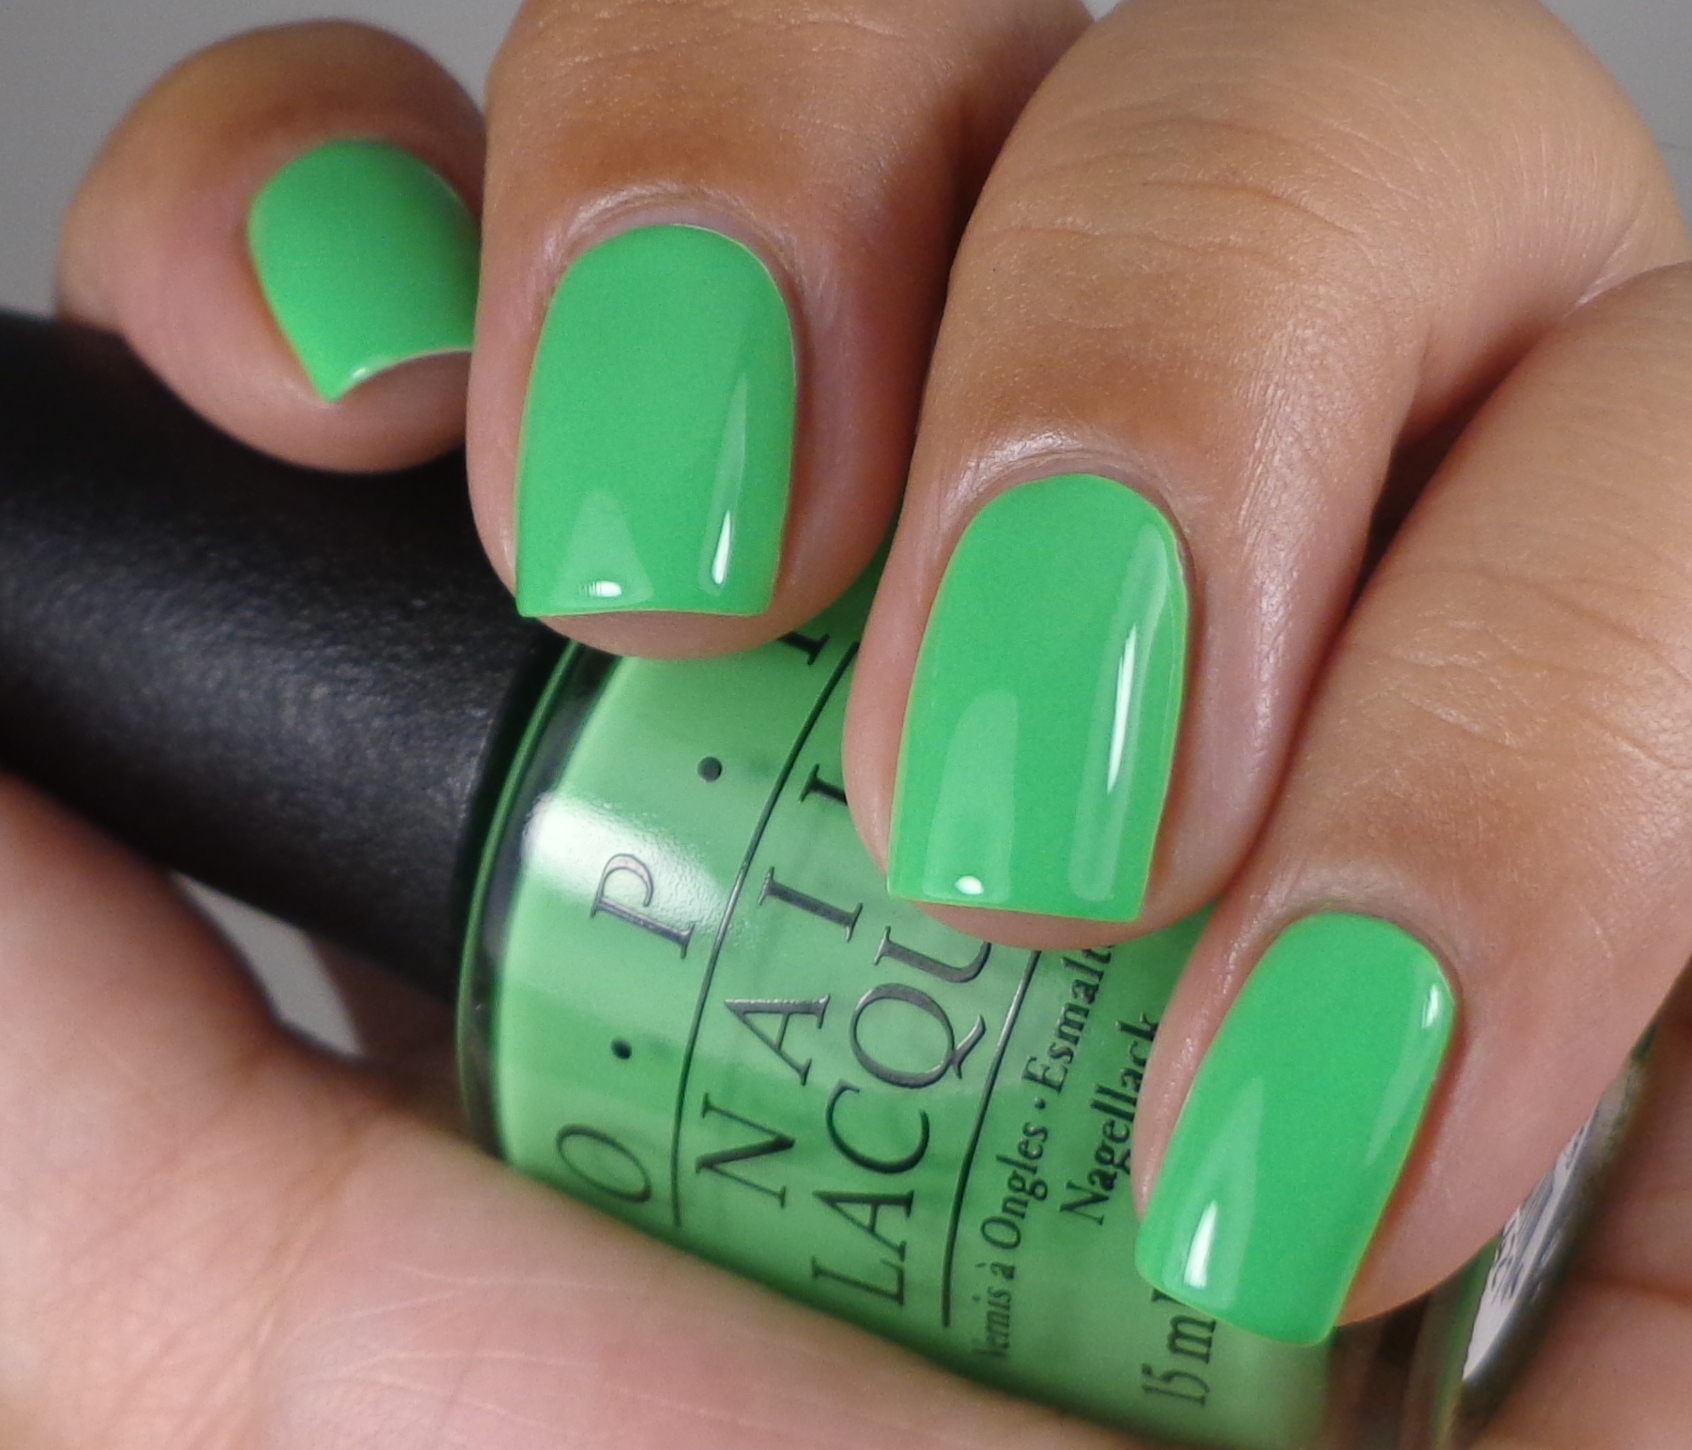 OPI You're So Outta Lime! 1